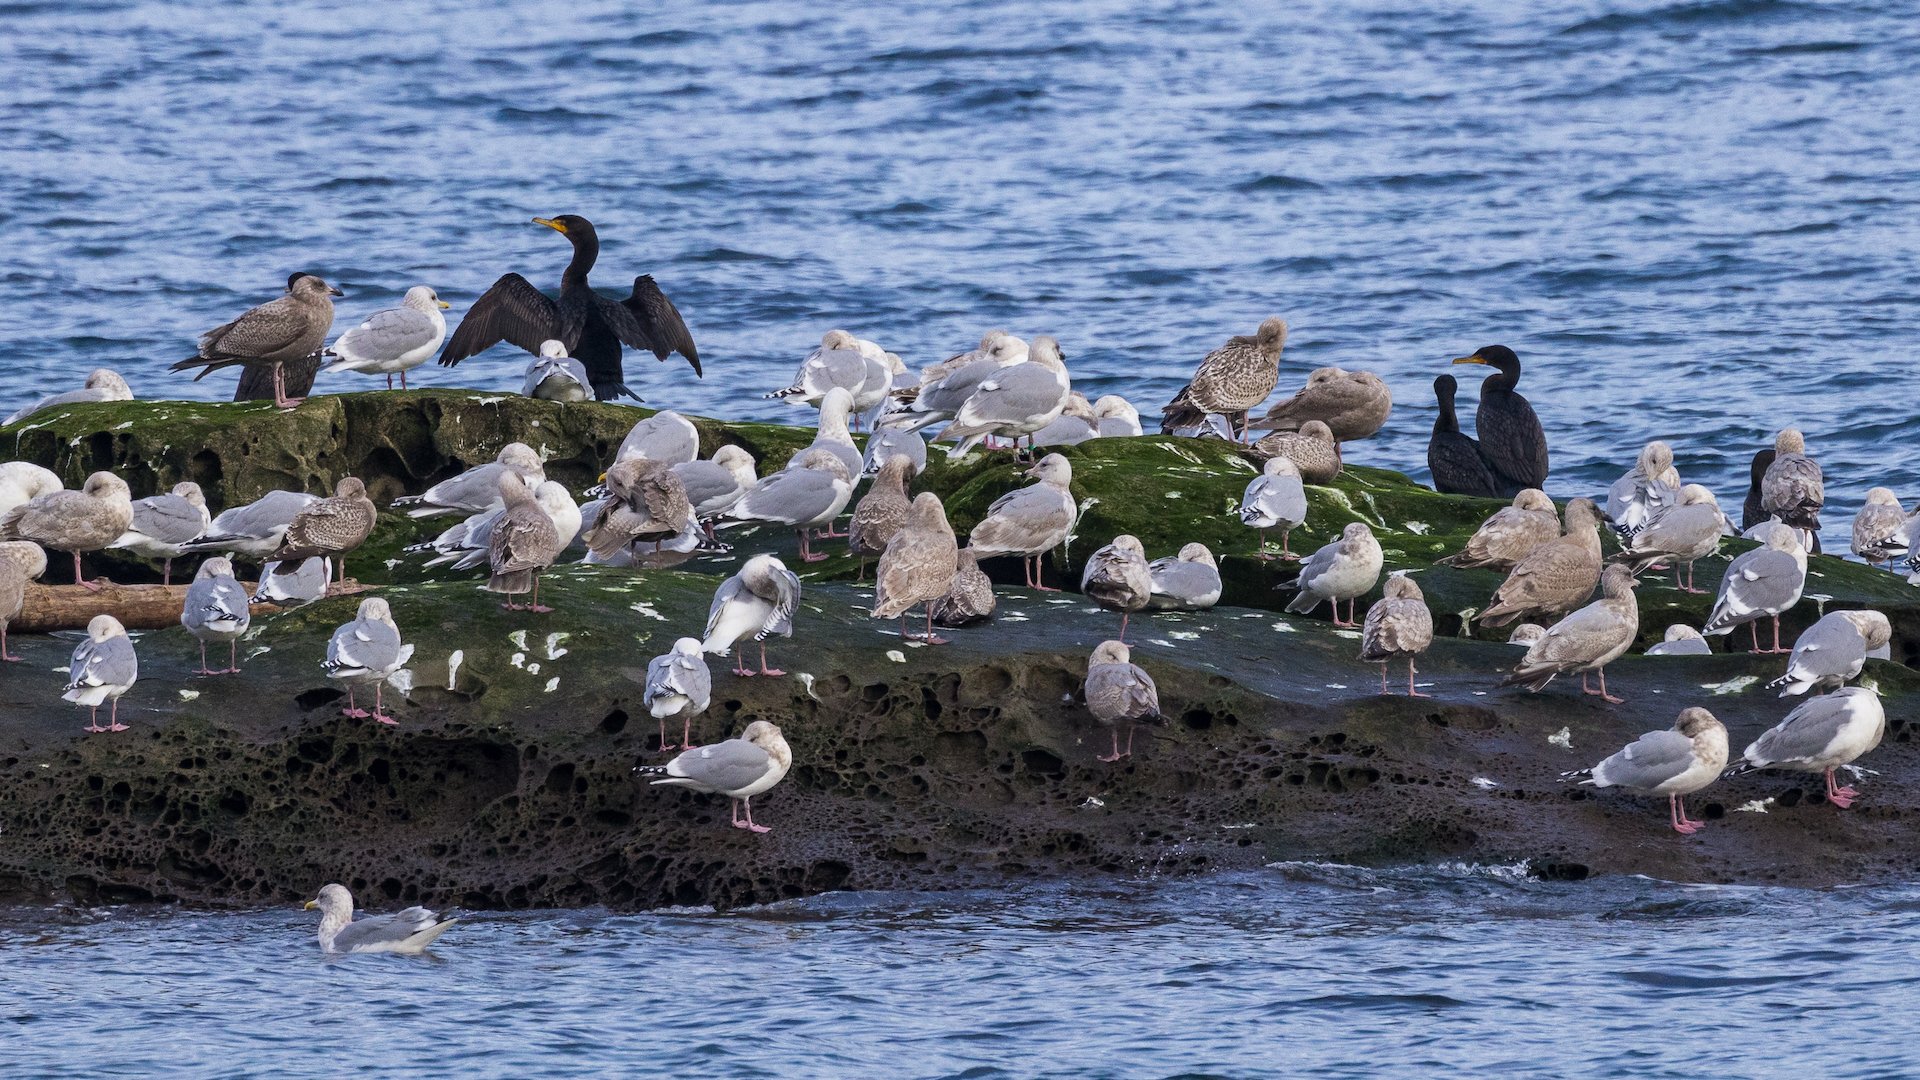  The rocks off the the beach were just covered in birds. Mostly gulls, but a few cormorants and even some shore birds. 